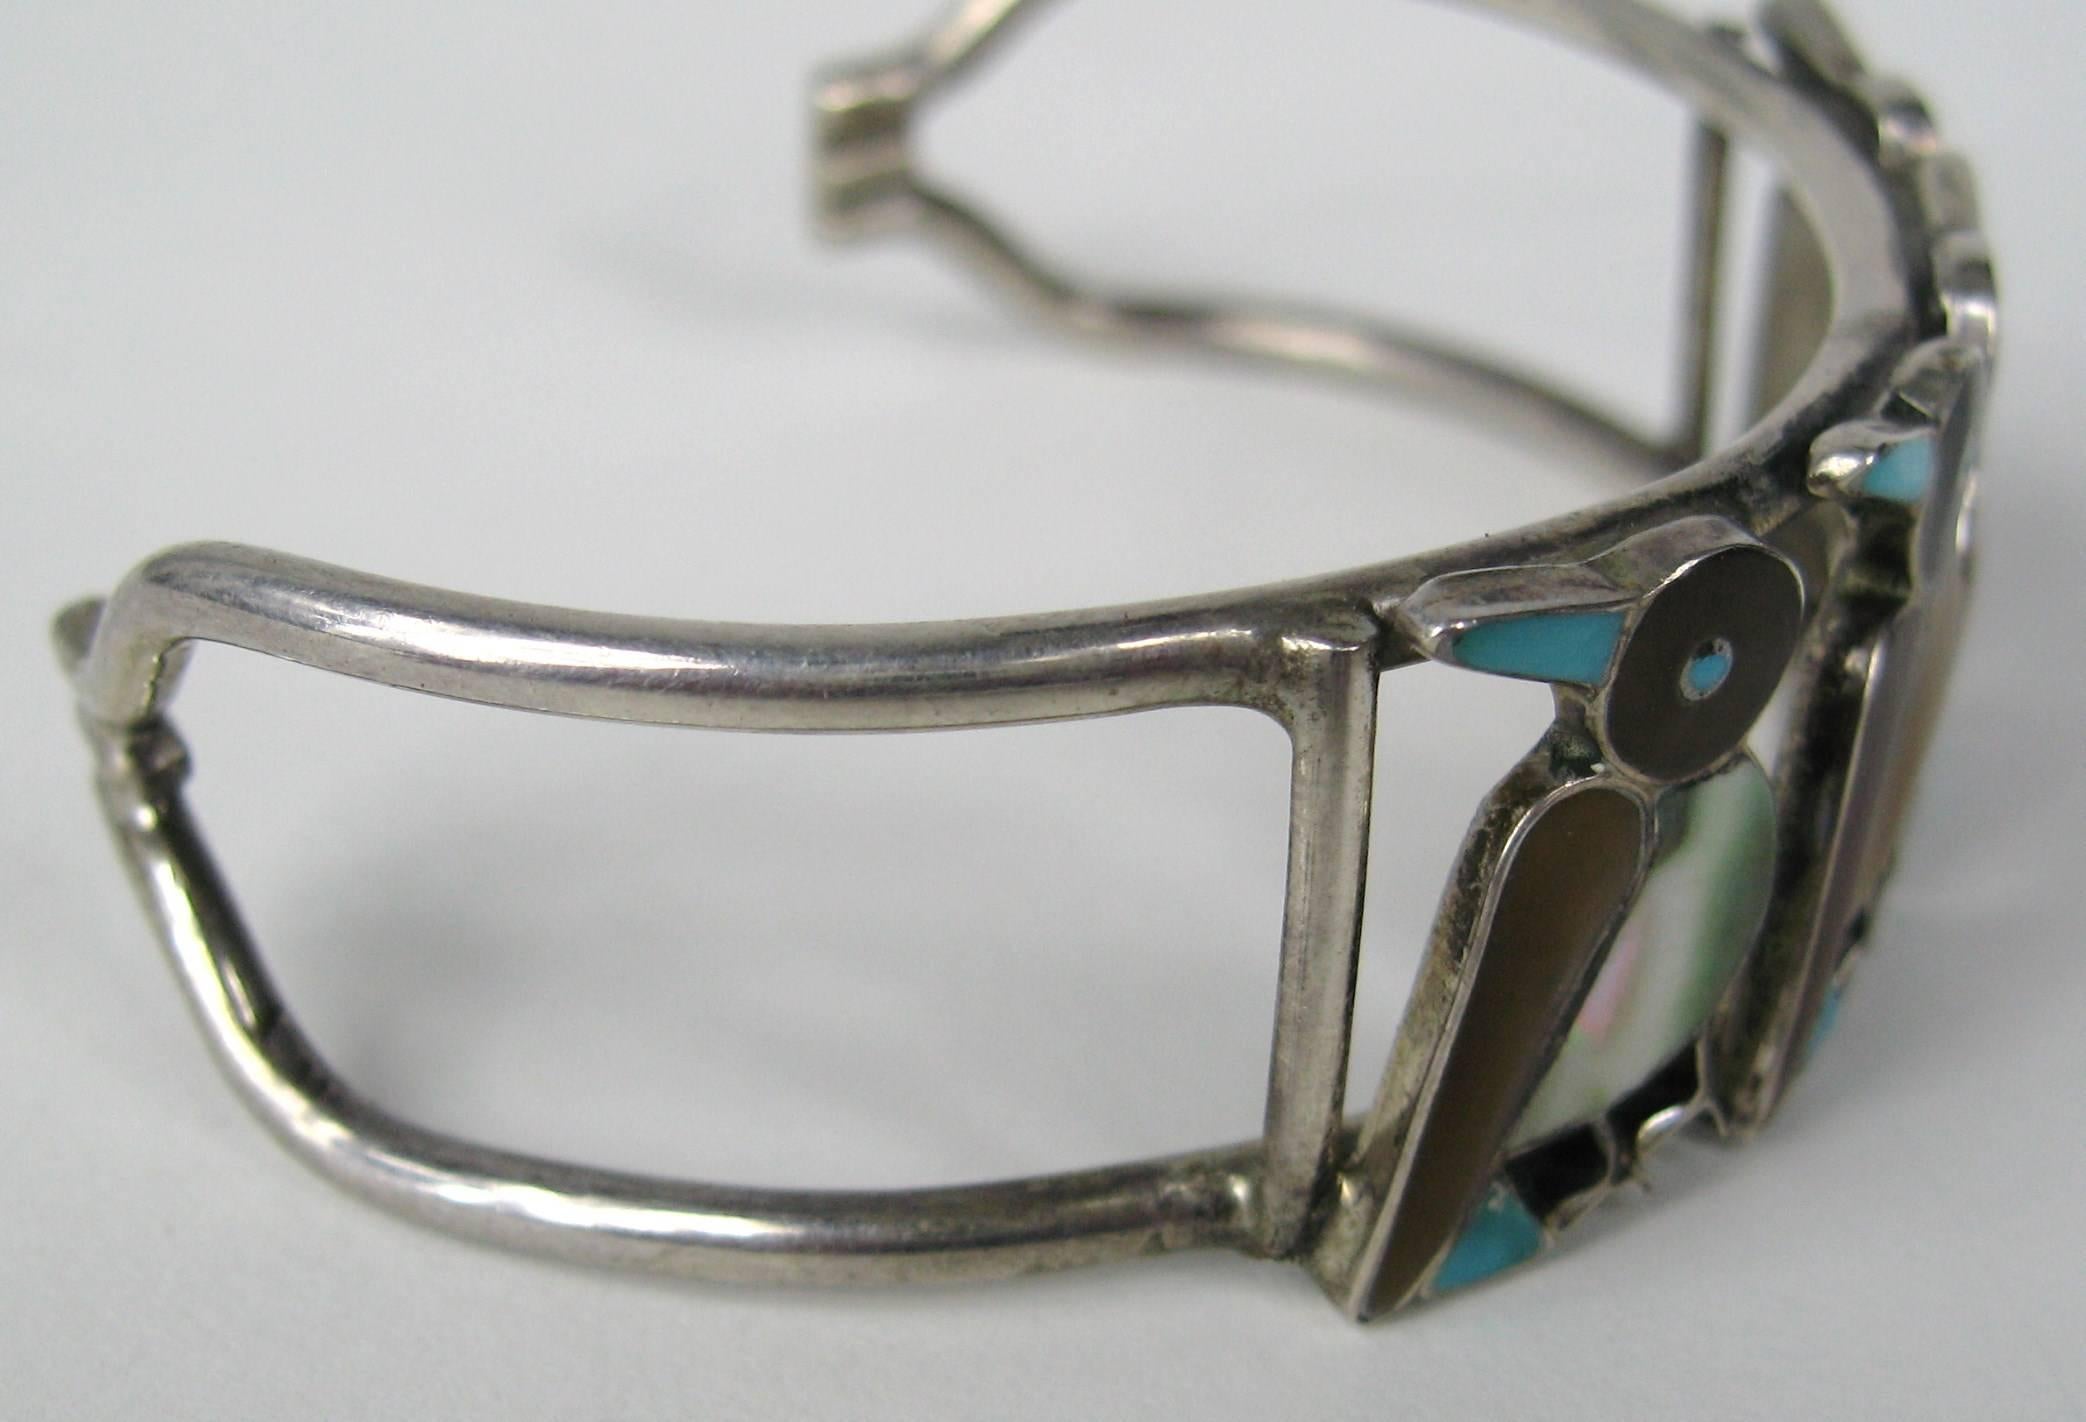 Four Zuni Birds Sterling Bracelet with Inlaid Stones Will fit a 6.5 to 7-inch wrist comfortably this is a little give to the bracelet. Measuring 3/4  wide 1.25 opening. This is out of a massive collection of Costume Jewelry, Hopi, Zuni, Navajo,